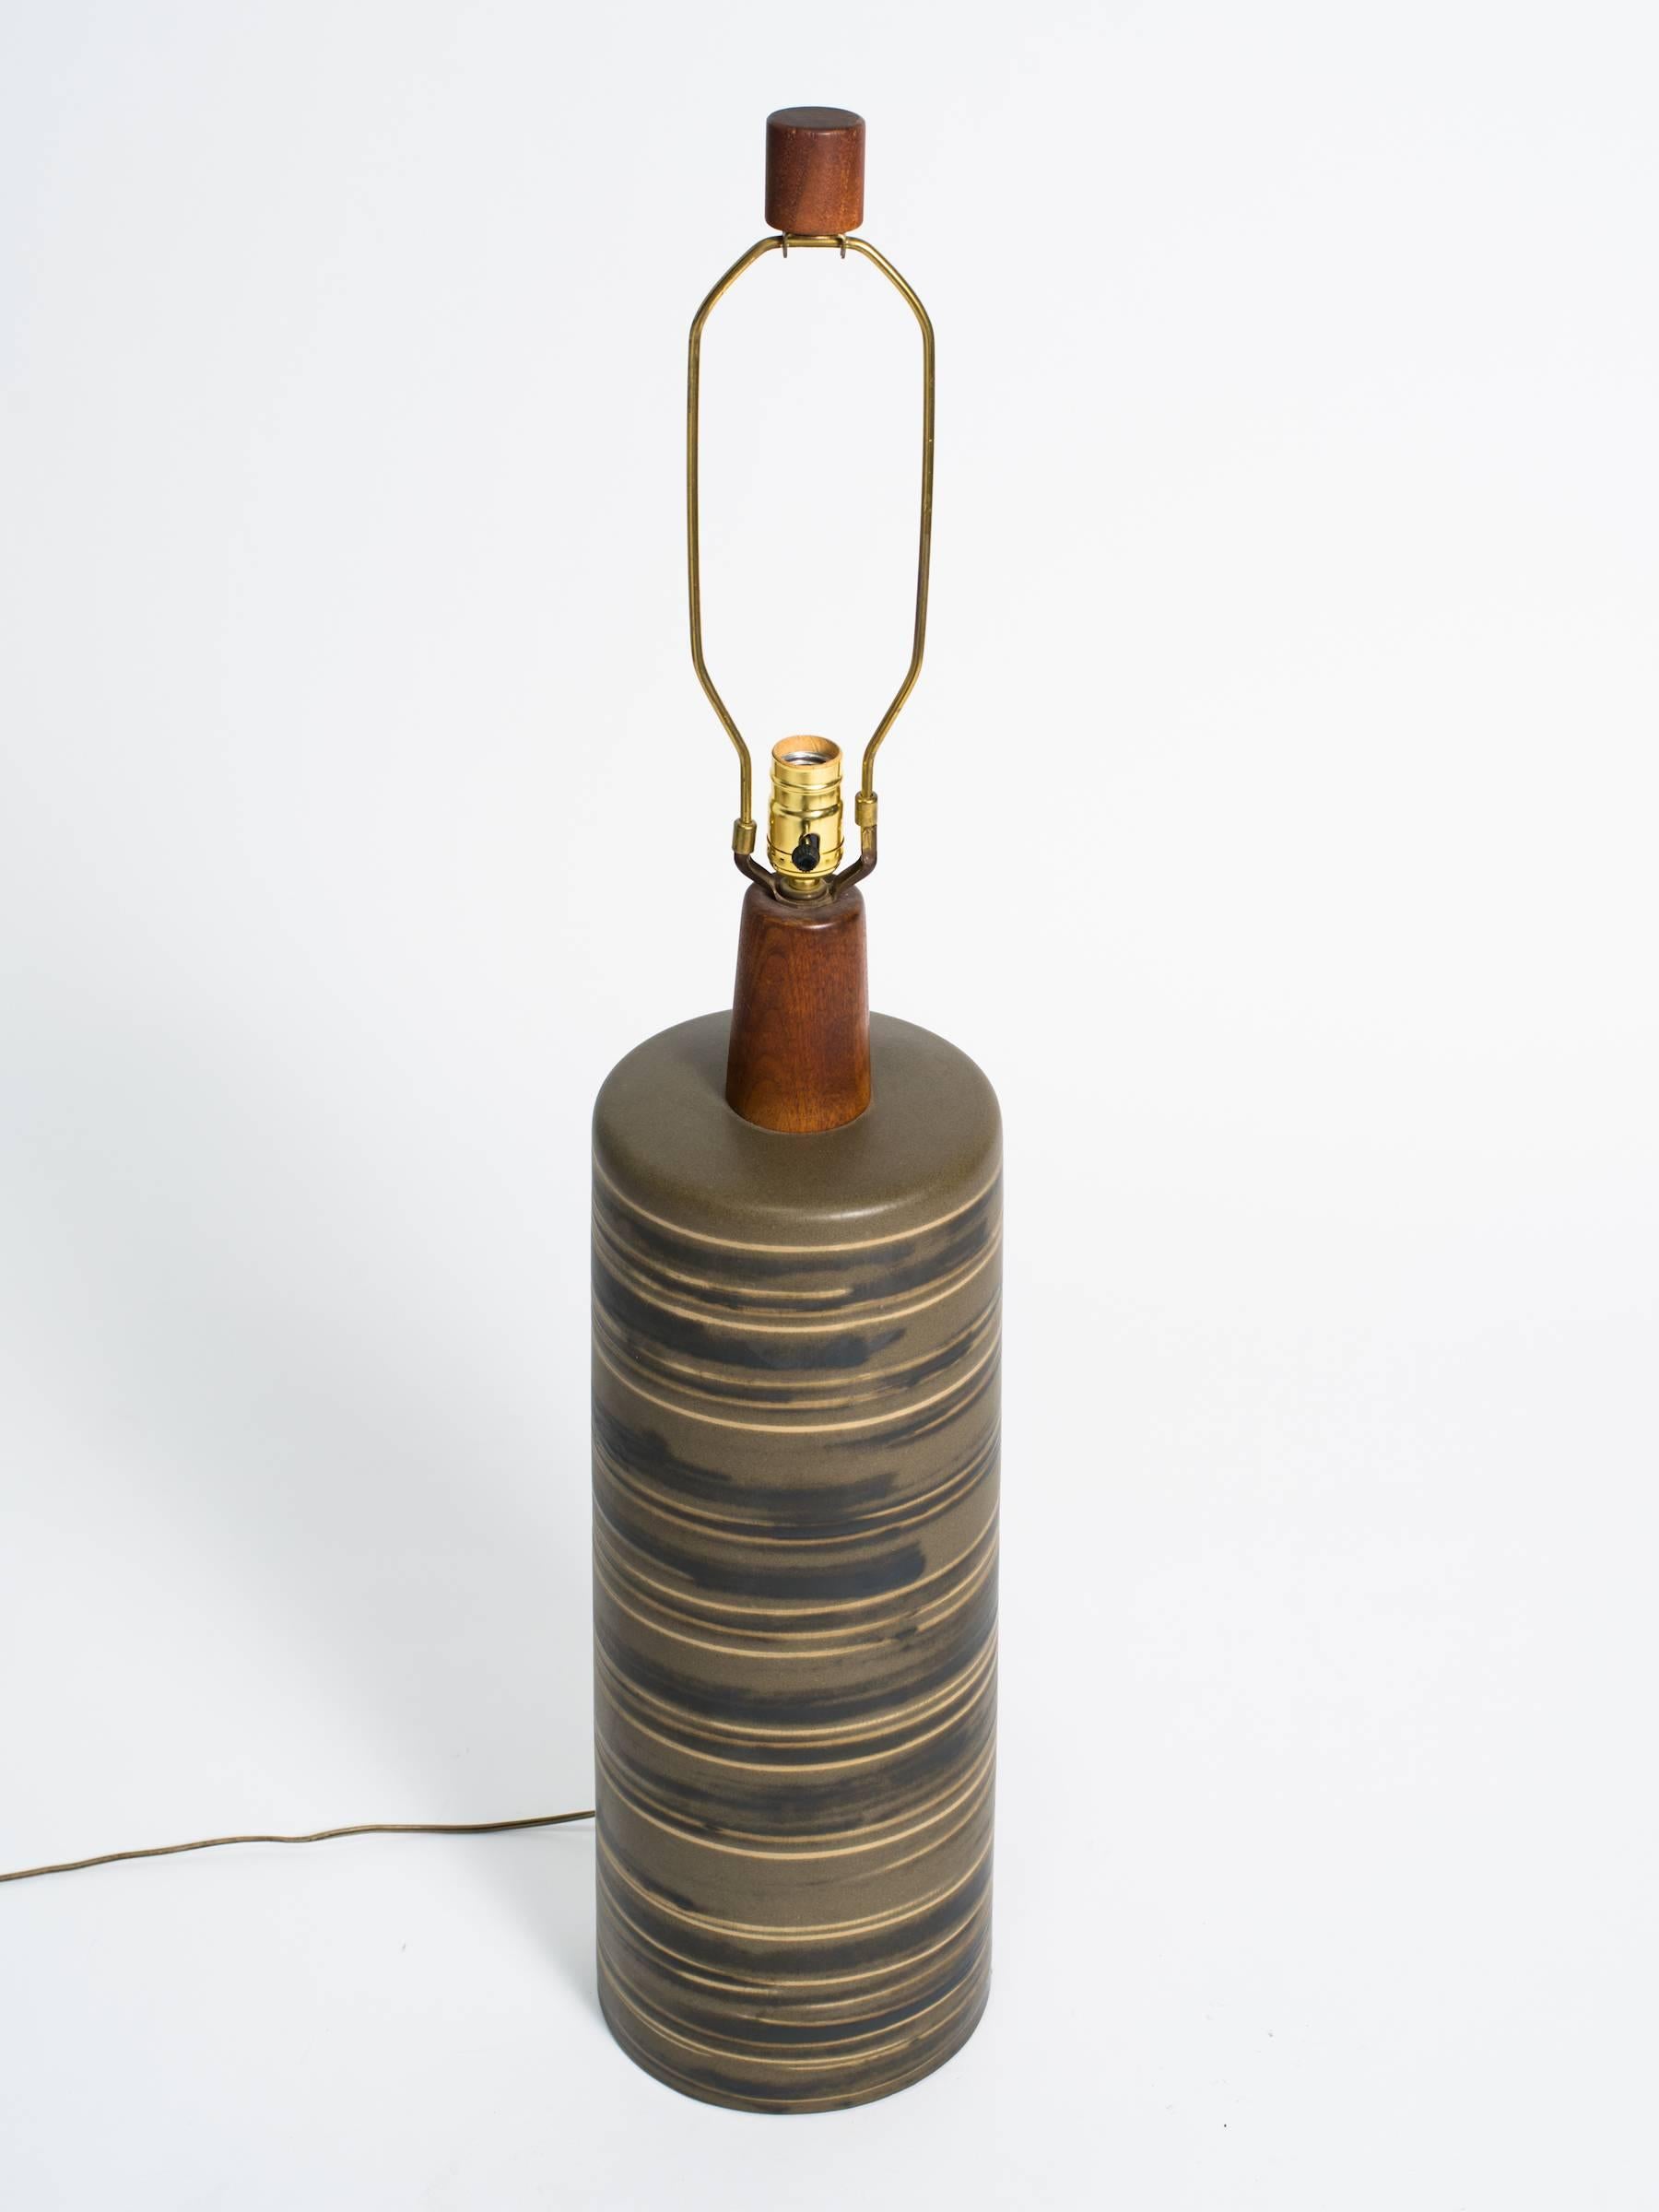 Tall Martz ceramic lamp with teak neck and finial.

Height is to the top of the socket.

